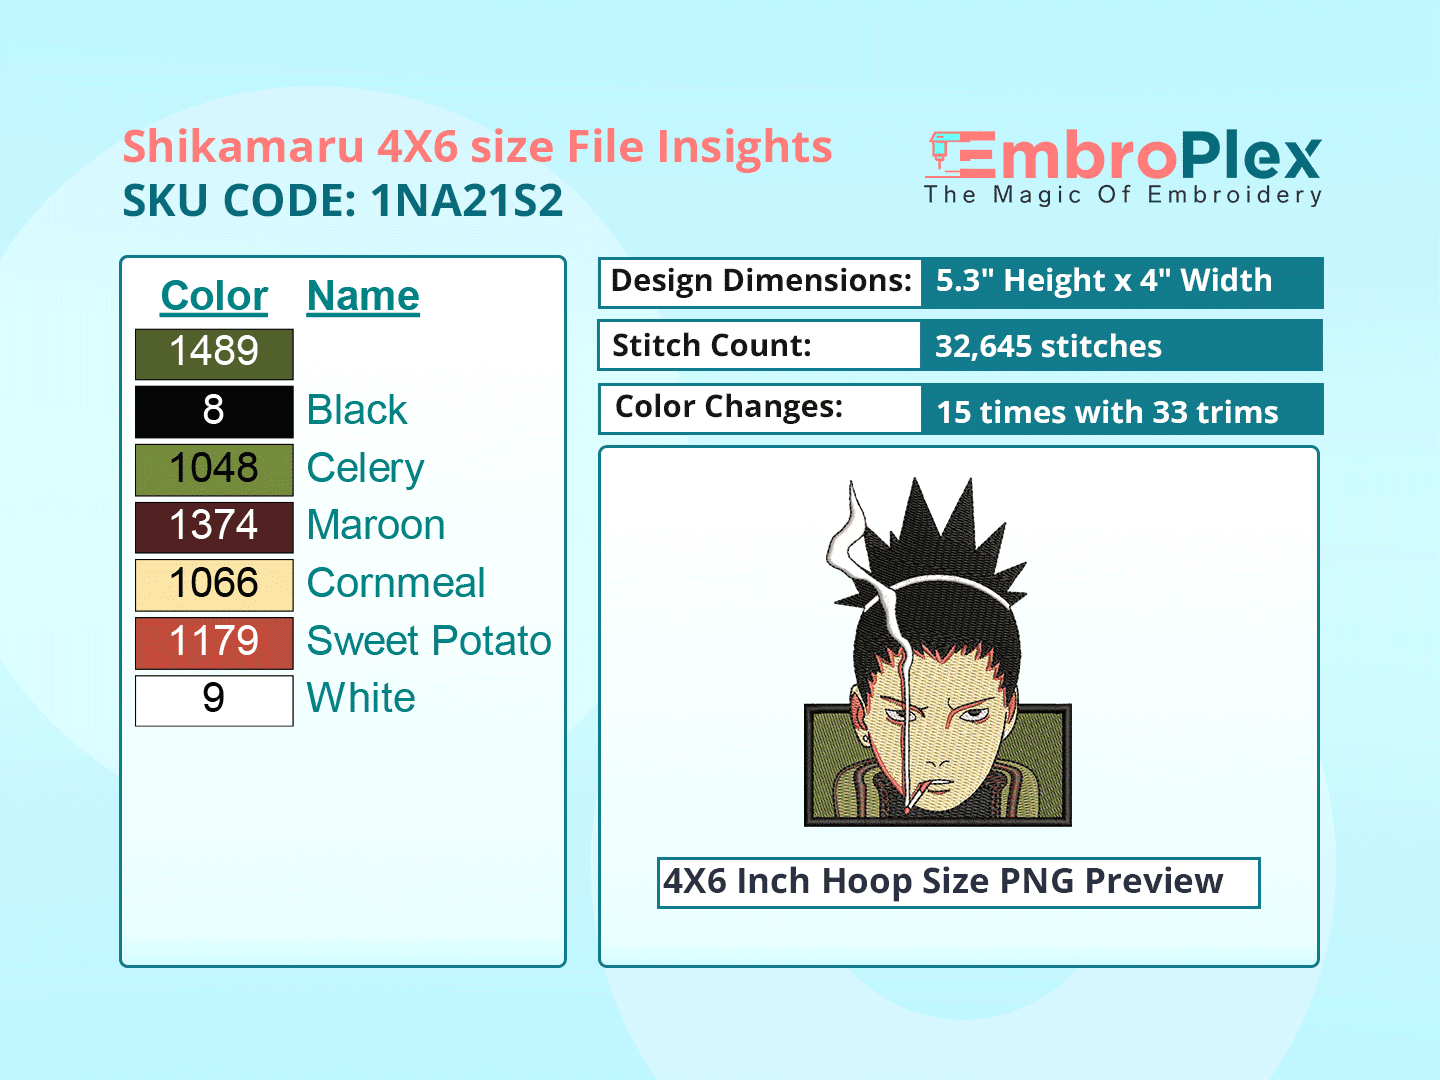  Anime-Inspired  Shikamaru Nara Embroidery Design File - 4x4 Inch hoop Size Variation overview image